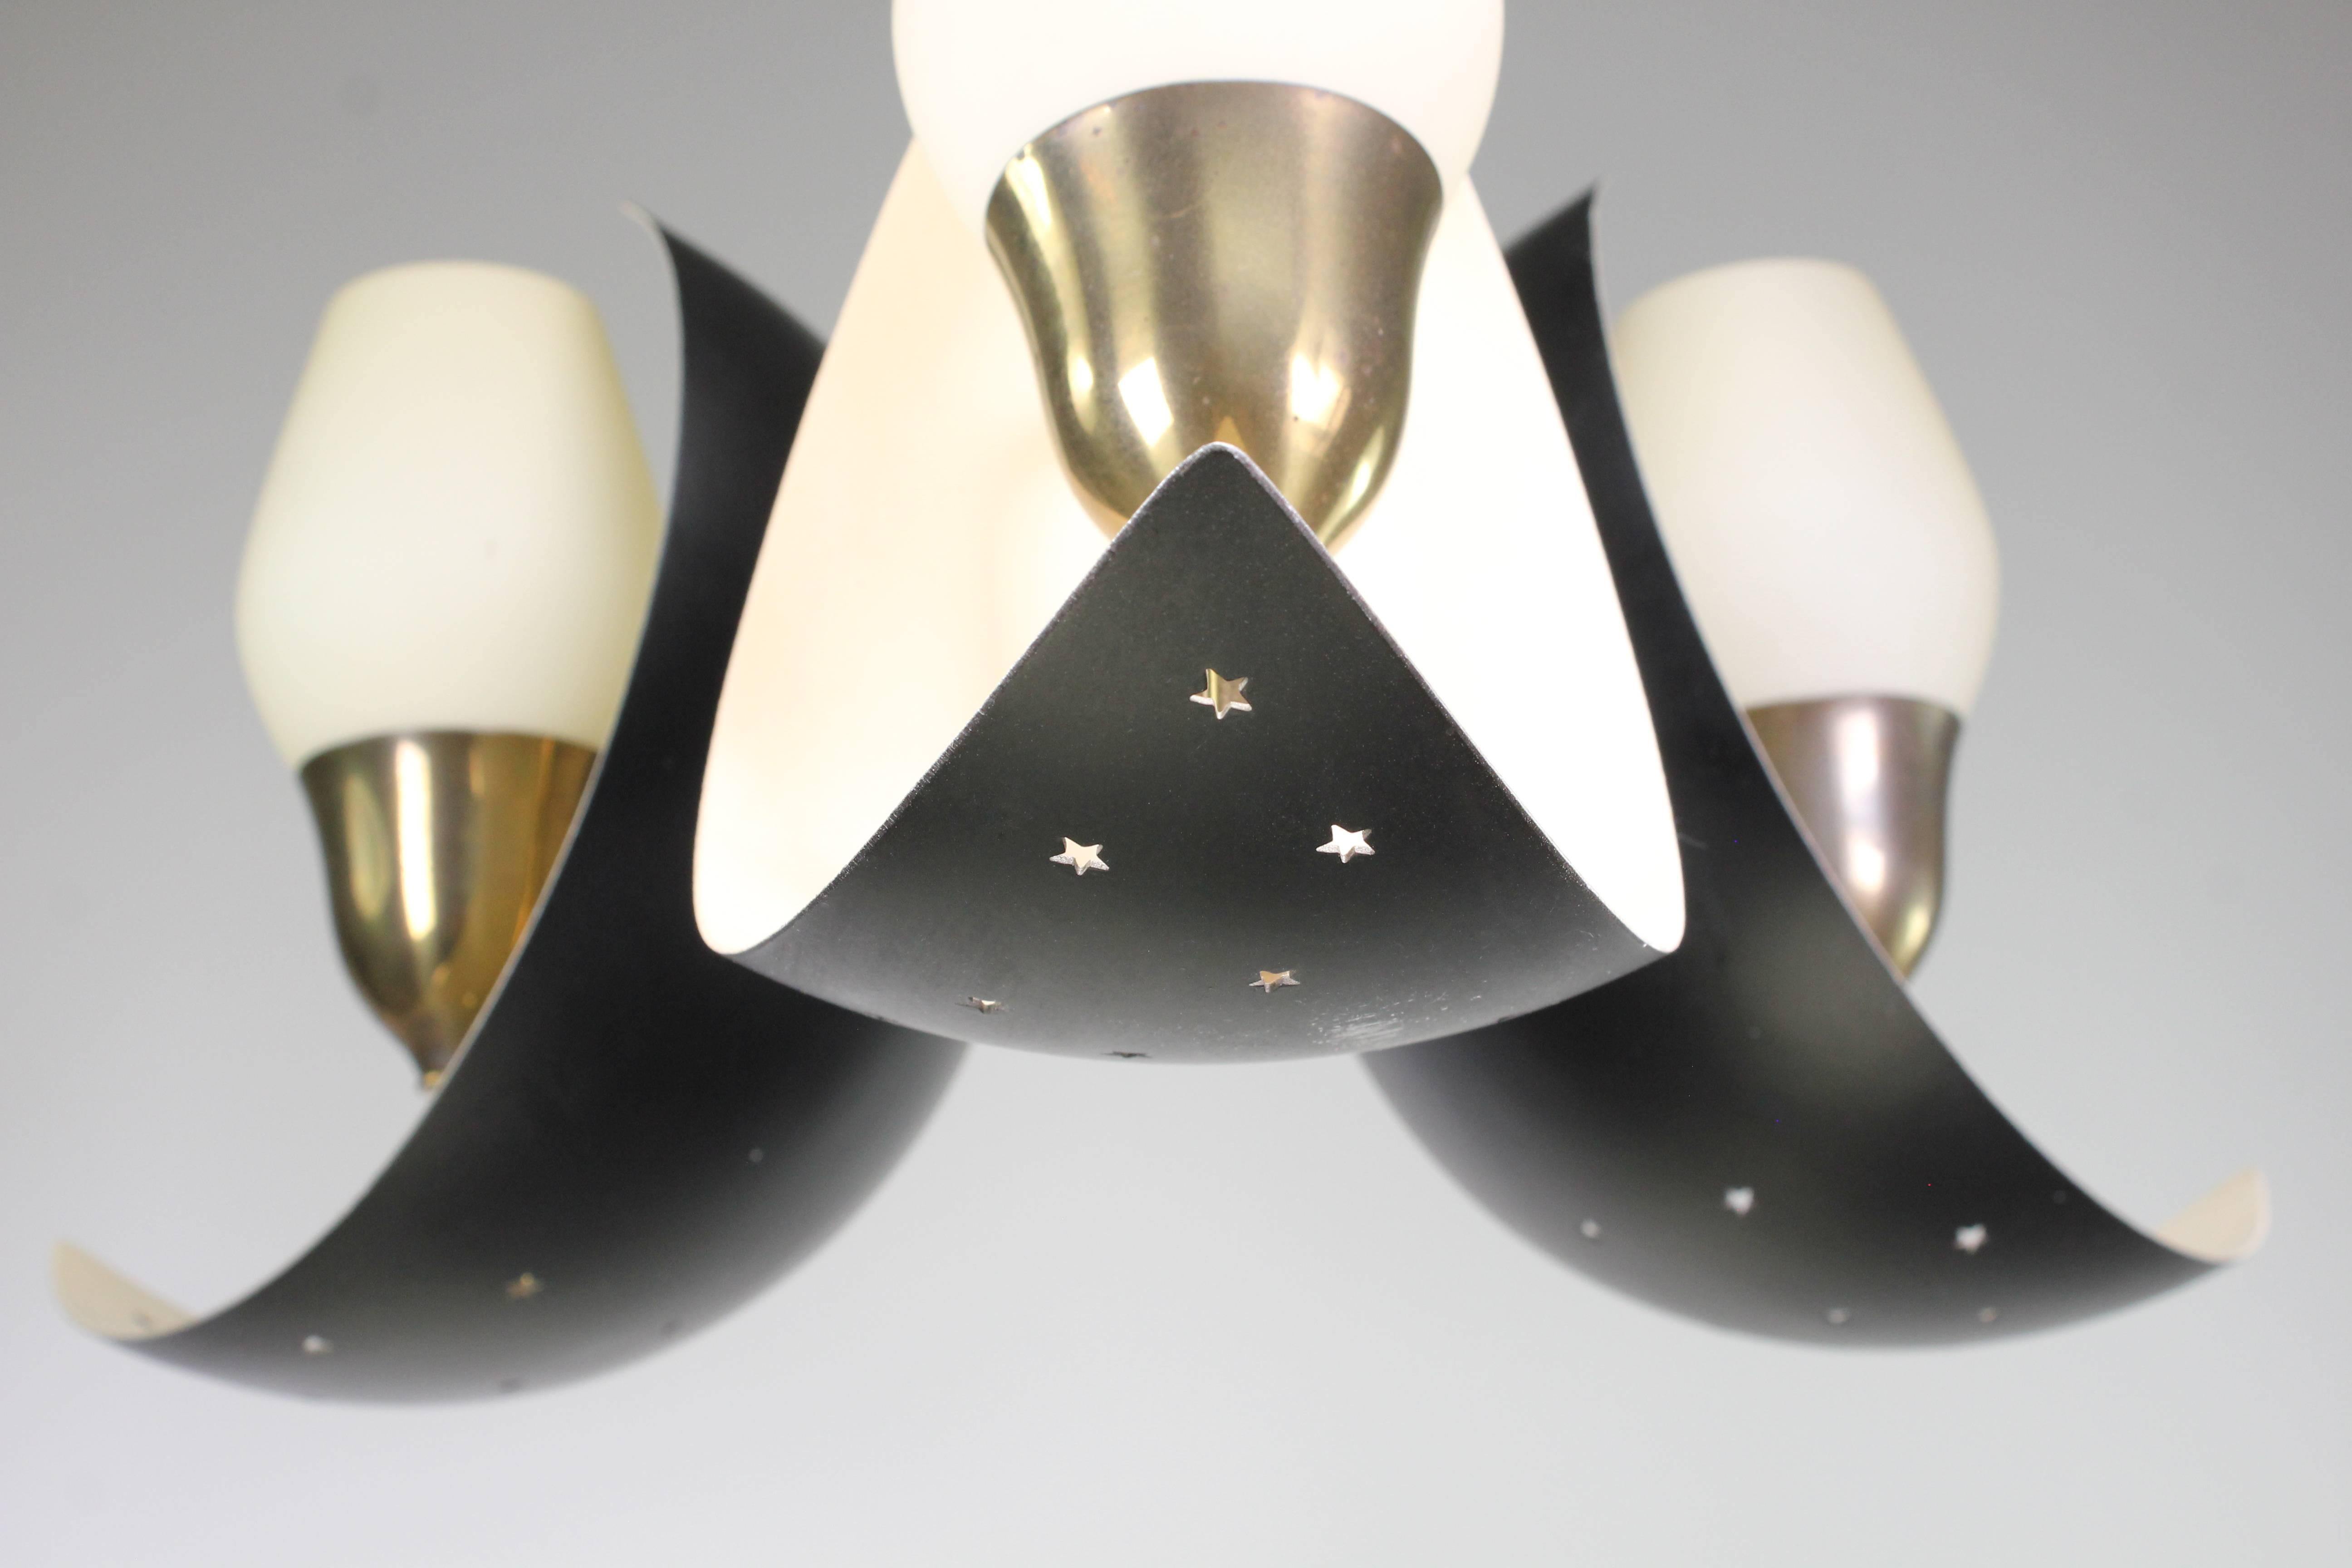 Black and cream white lacquered metal pendant with brass arms and white tulip shaped opaline glass by Danish designer Bent Karlby for Fog and Mørup. On a brass mount are three crescents that are black on the outside and white on the inside. Each